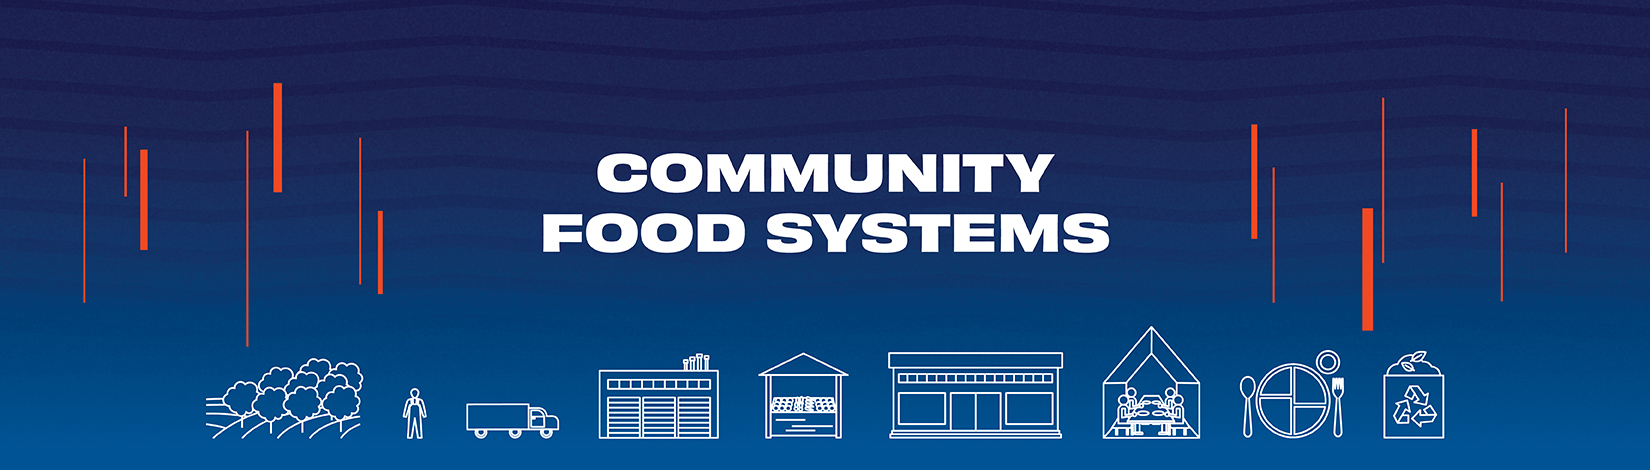 Community Food Systems Banner